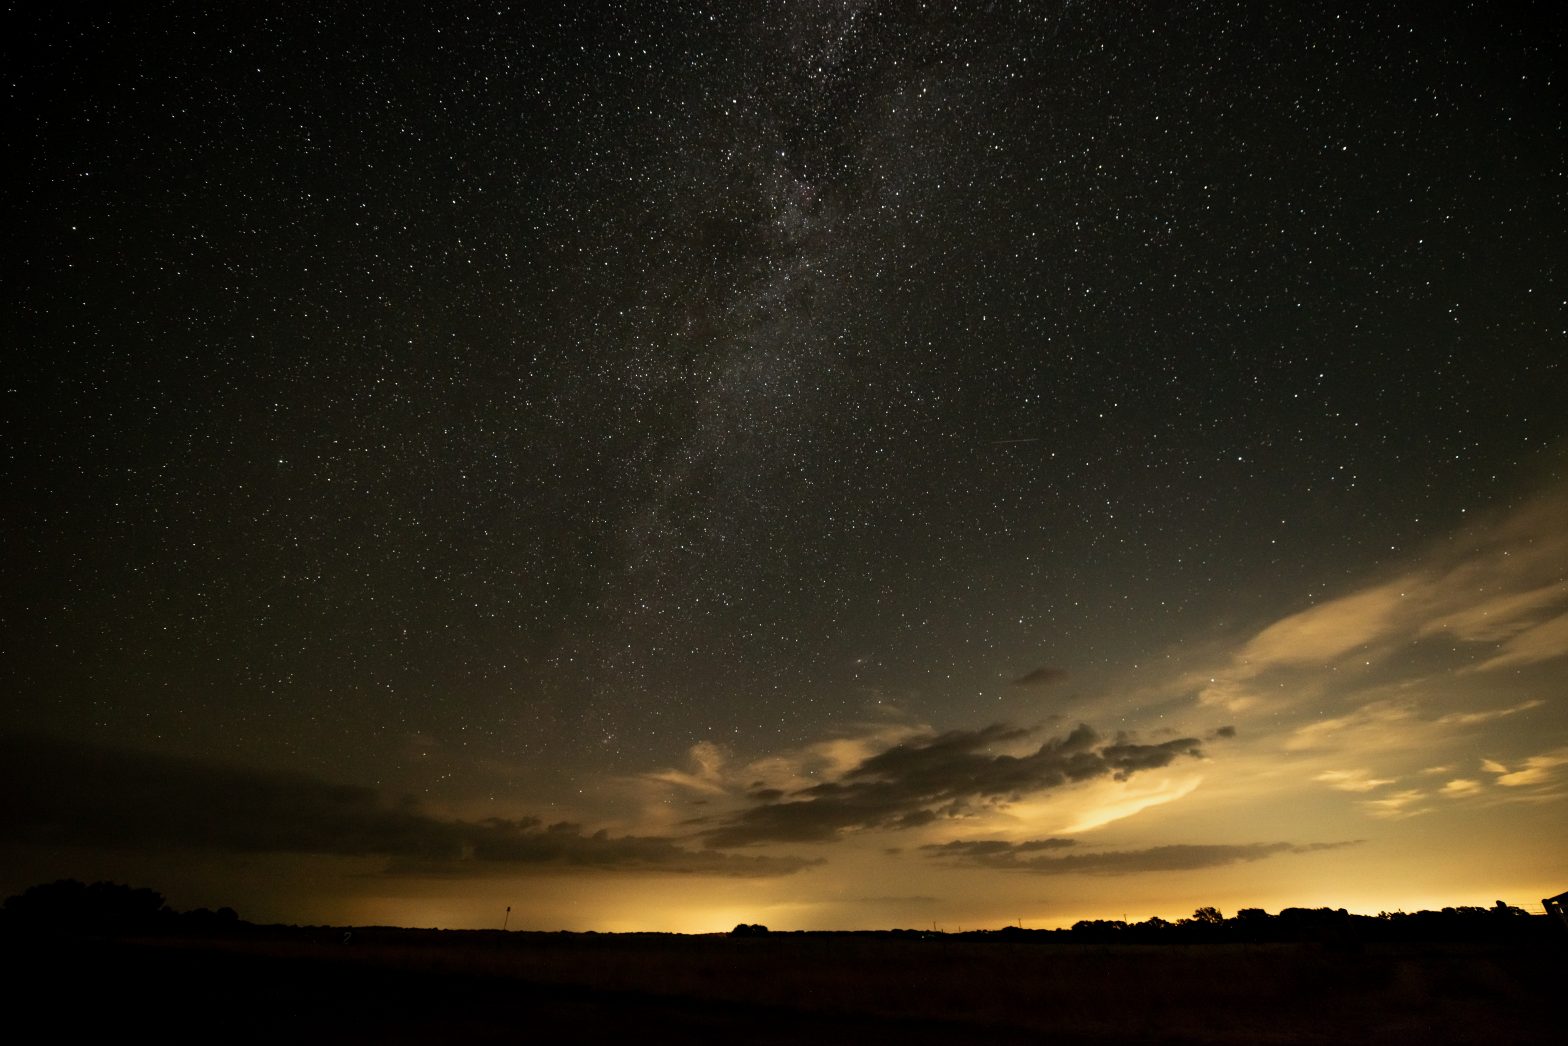 The stars and the Milky Way over the LBJ Ranch. There are some clouds and an orange glow on the horizon.